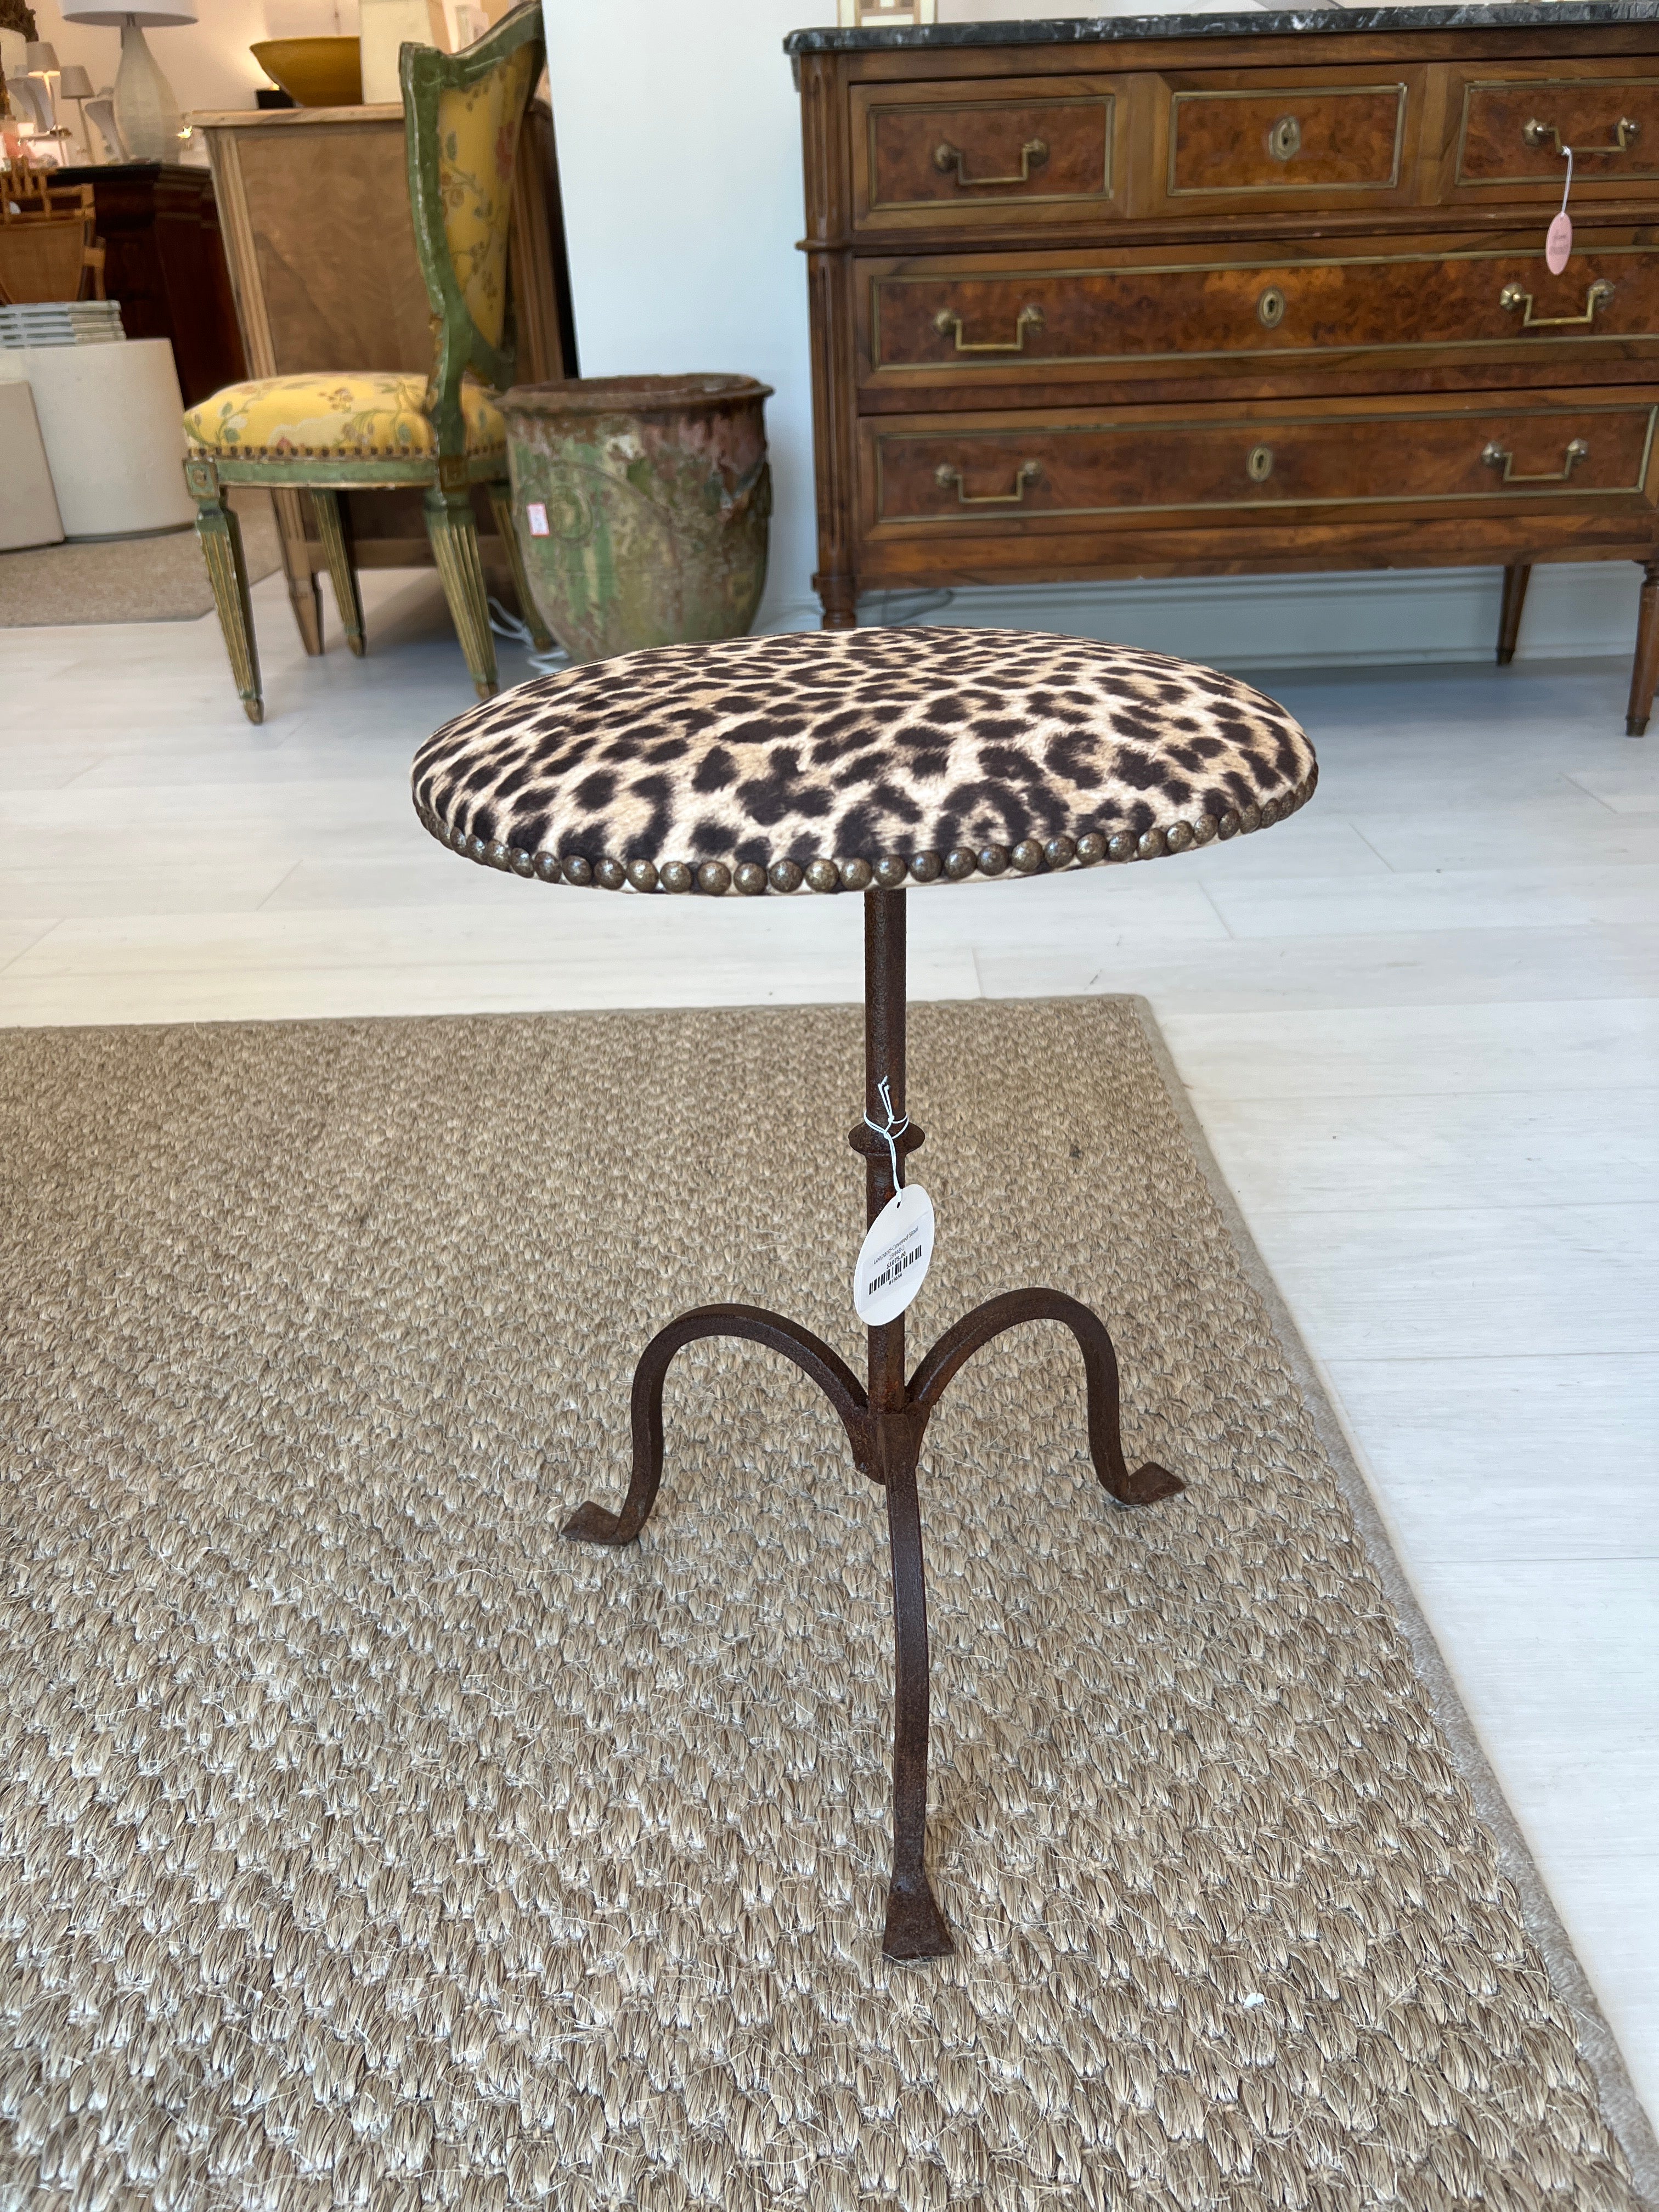 Leopard-Covered Stool